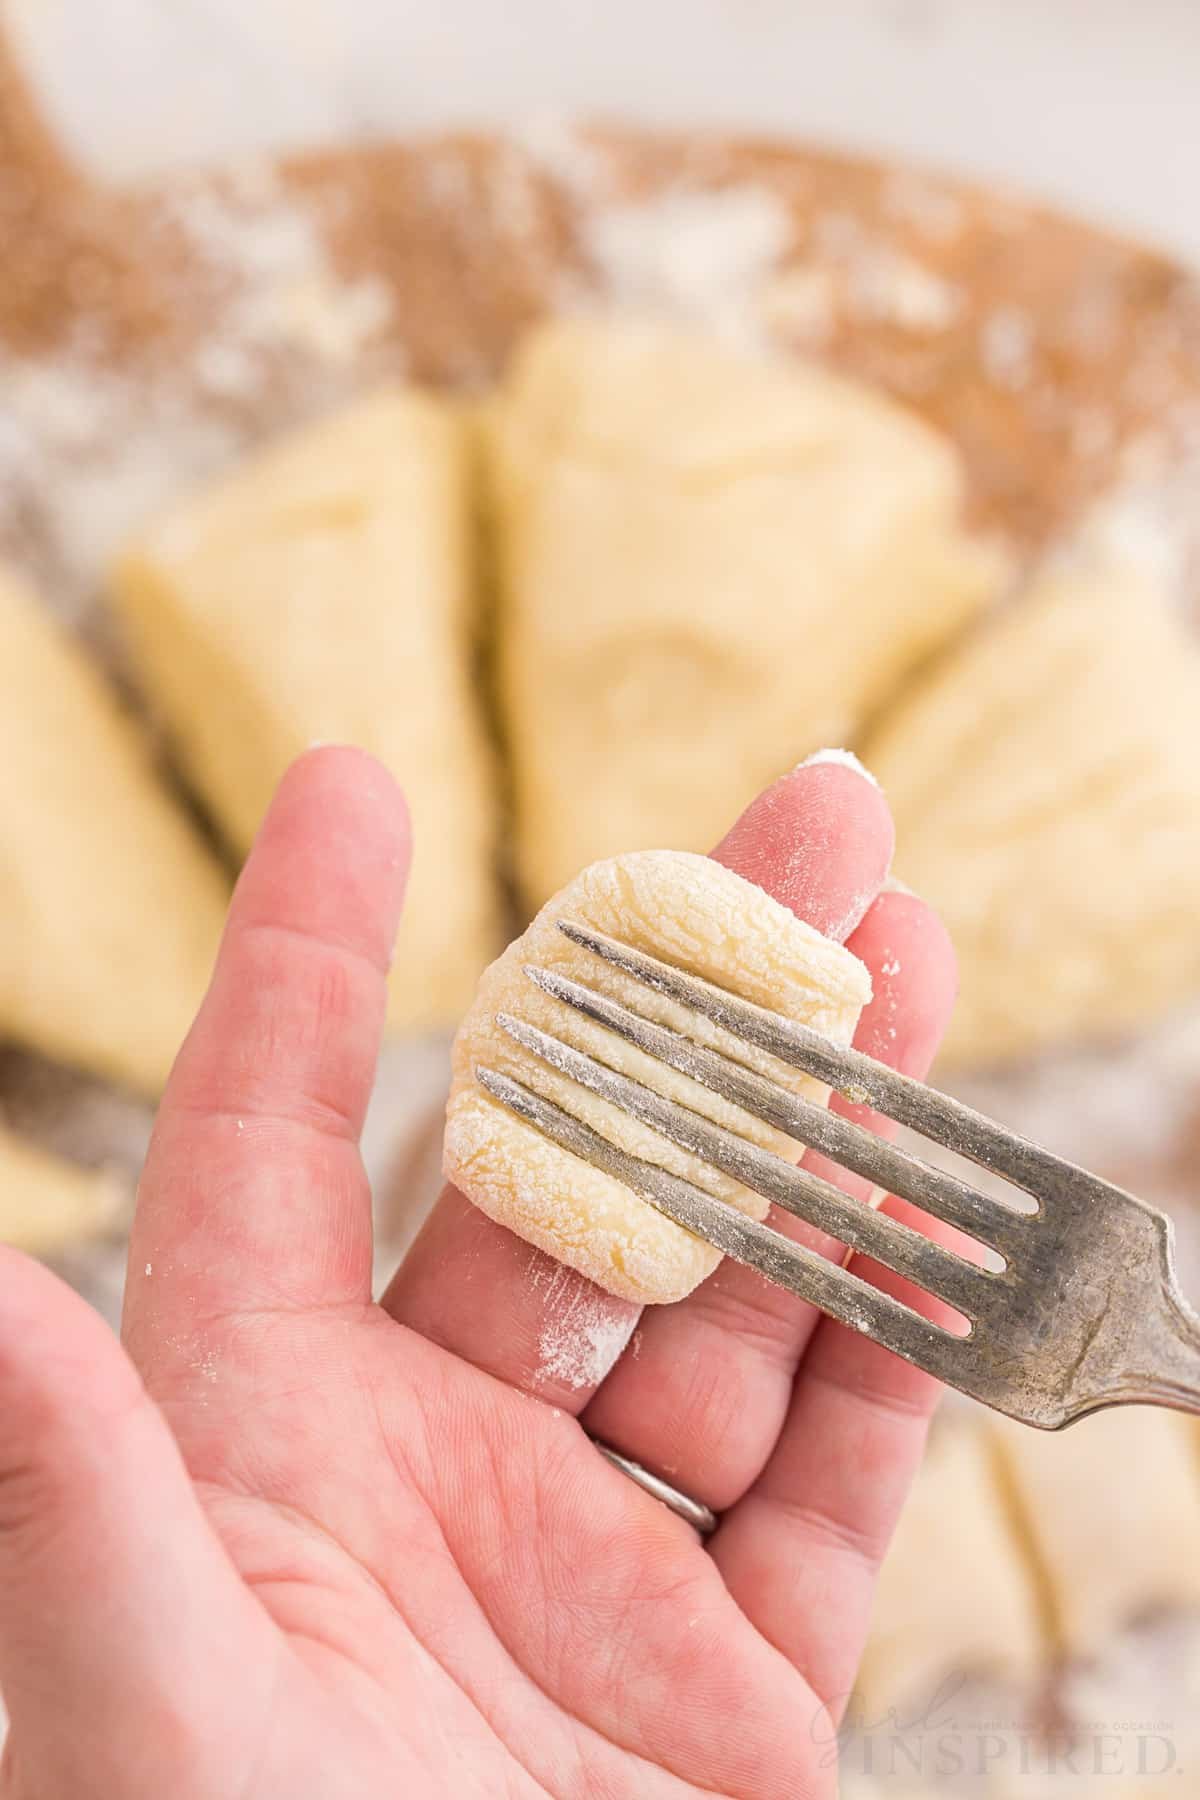 Metal fork pressed against piece of gnocchi dough against finger, gnocchi dough on a wooden kitchen board in the background.